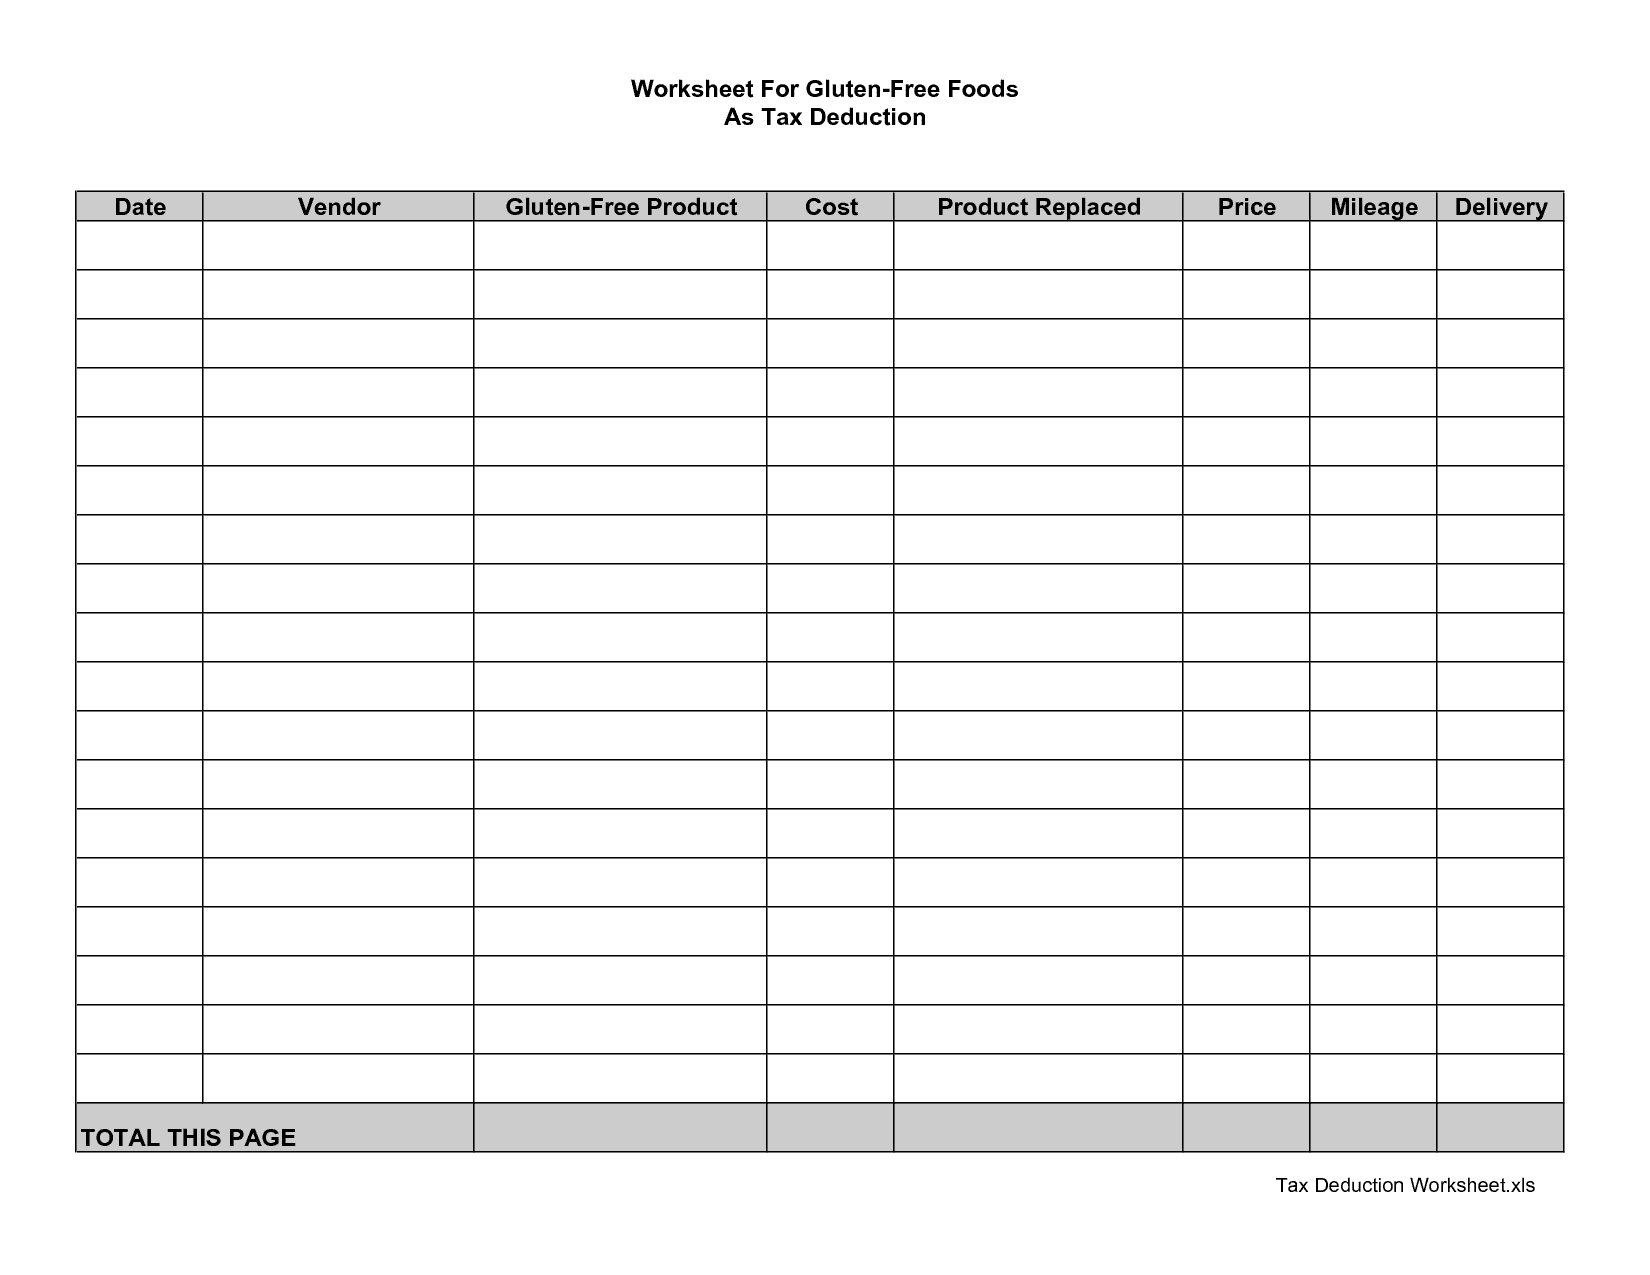 Sample Tax Expense Sheet And Monthly Expense Report Form